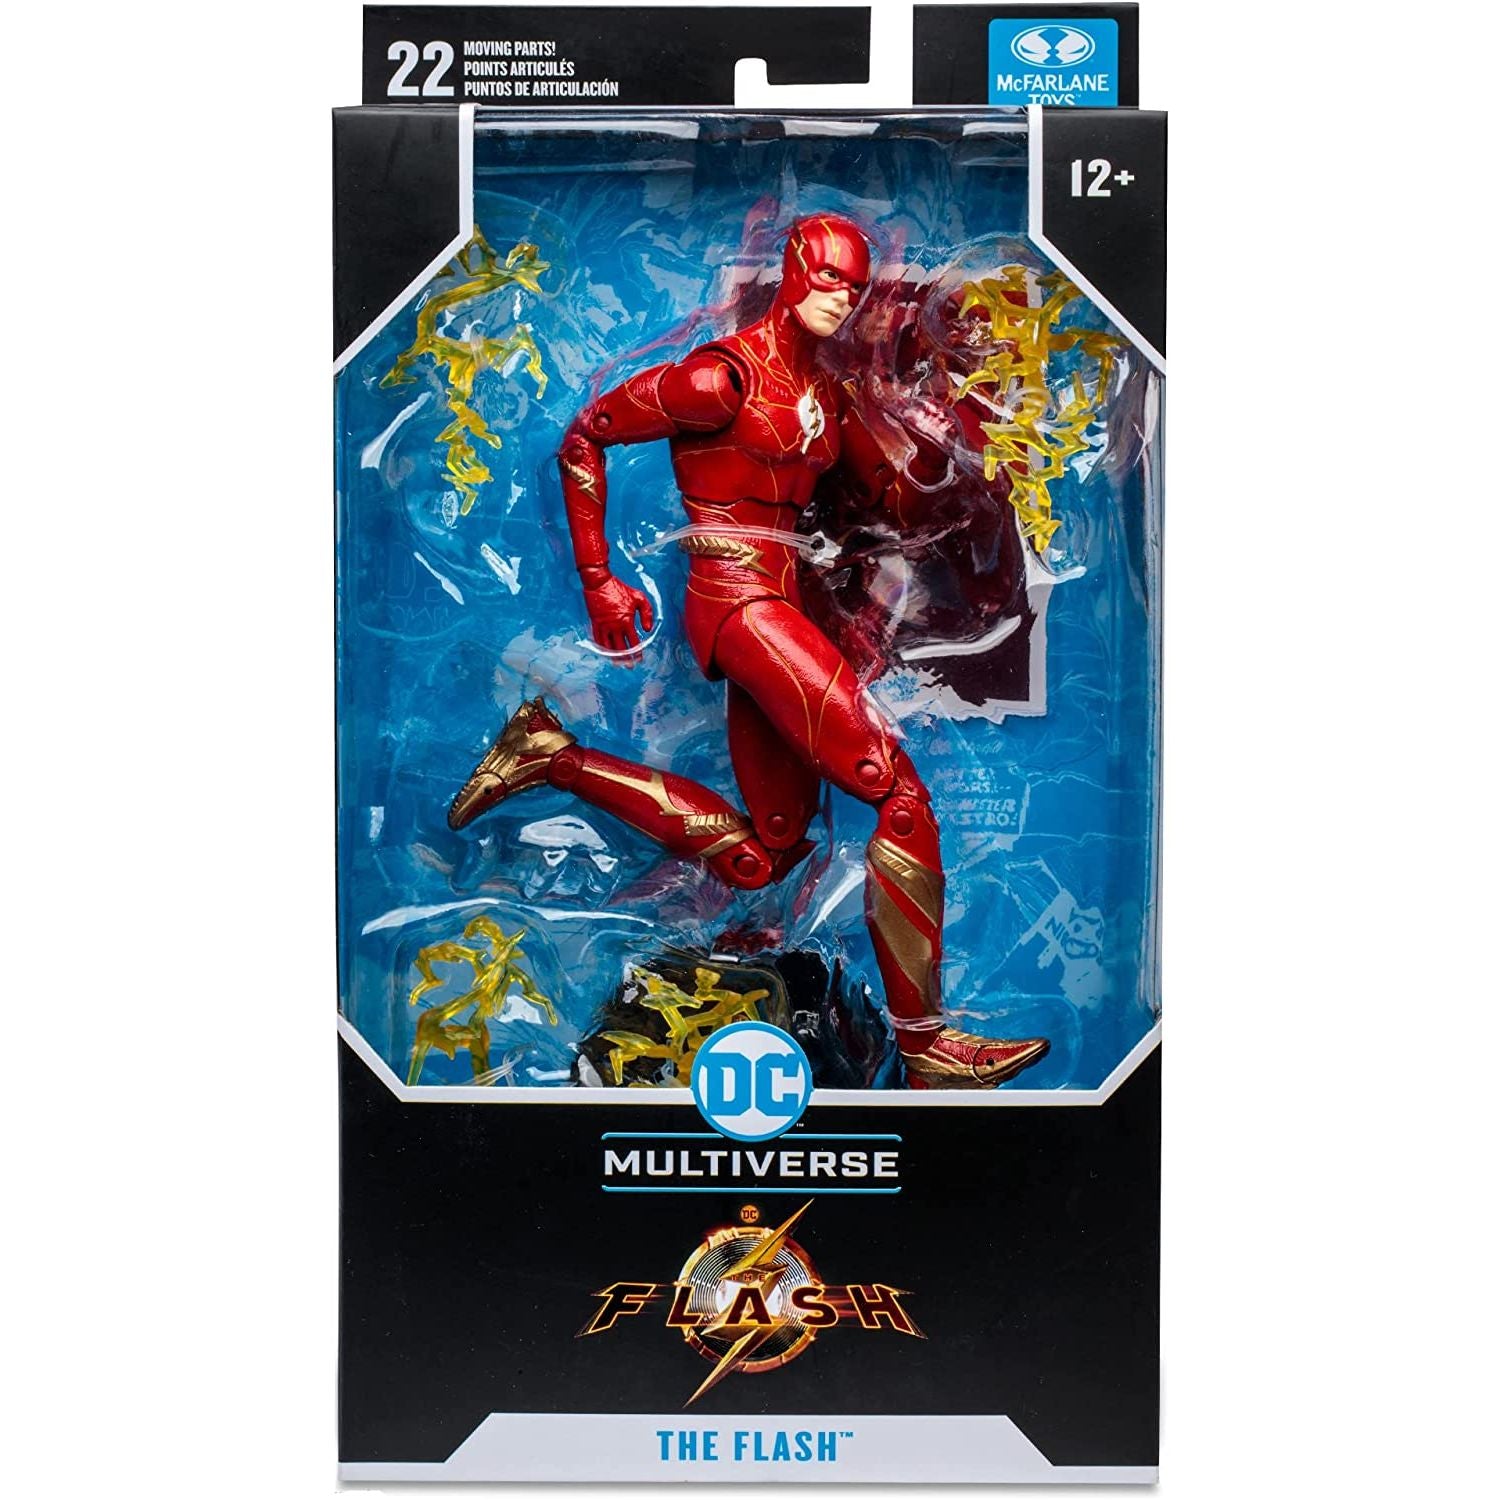 DC Multiverse - The Flash Movie - The Flash Action Figure 7INCh Toy Ina box - Heretoserveyou